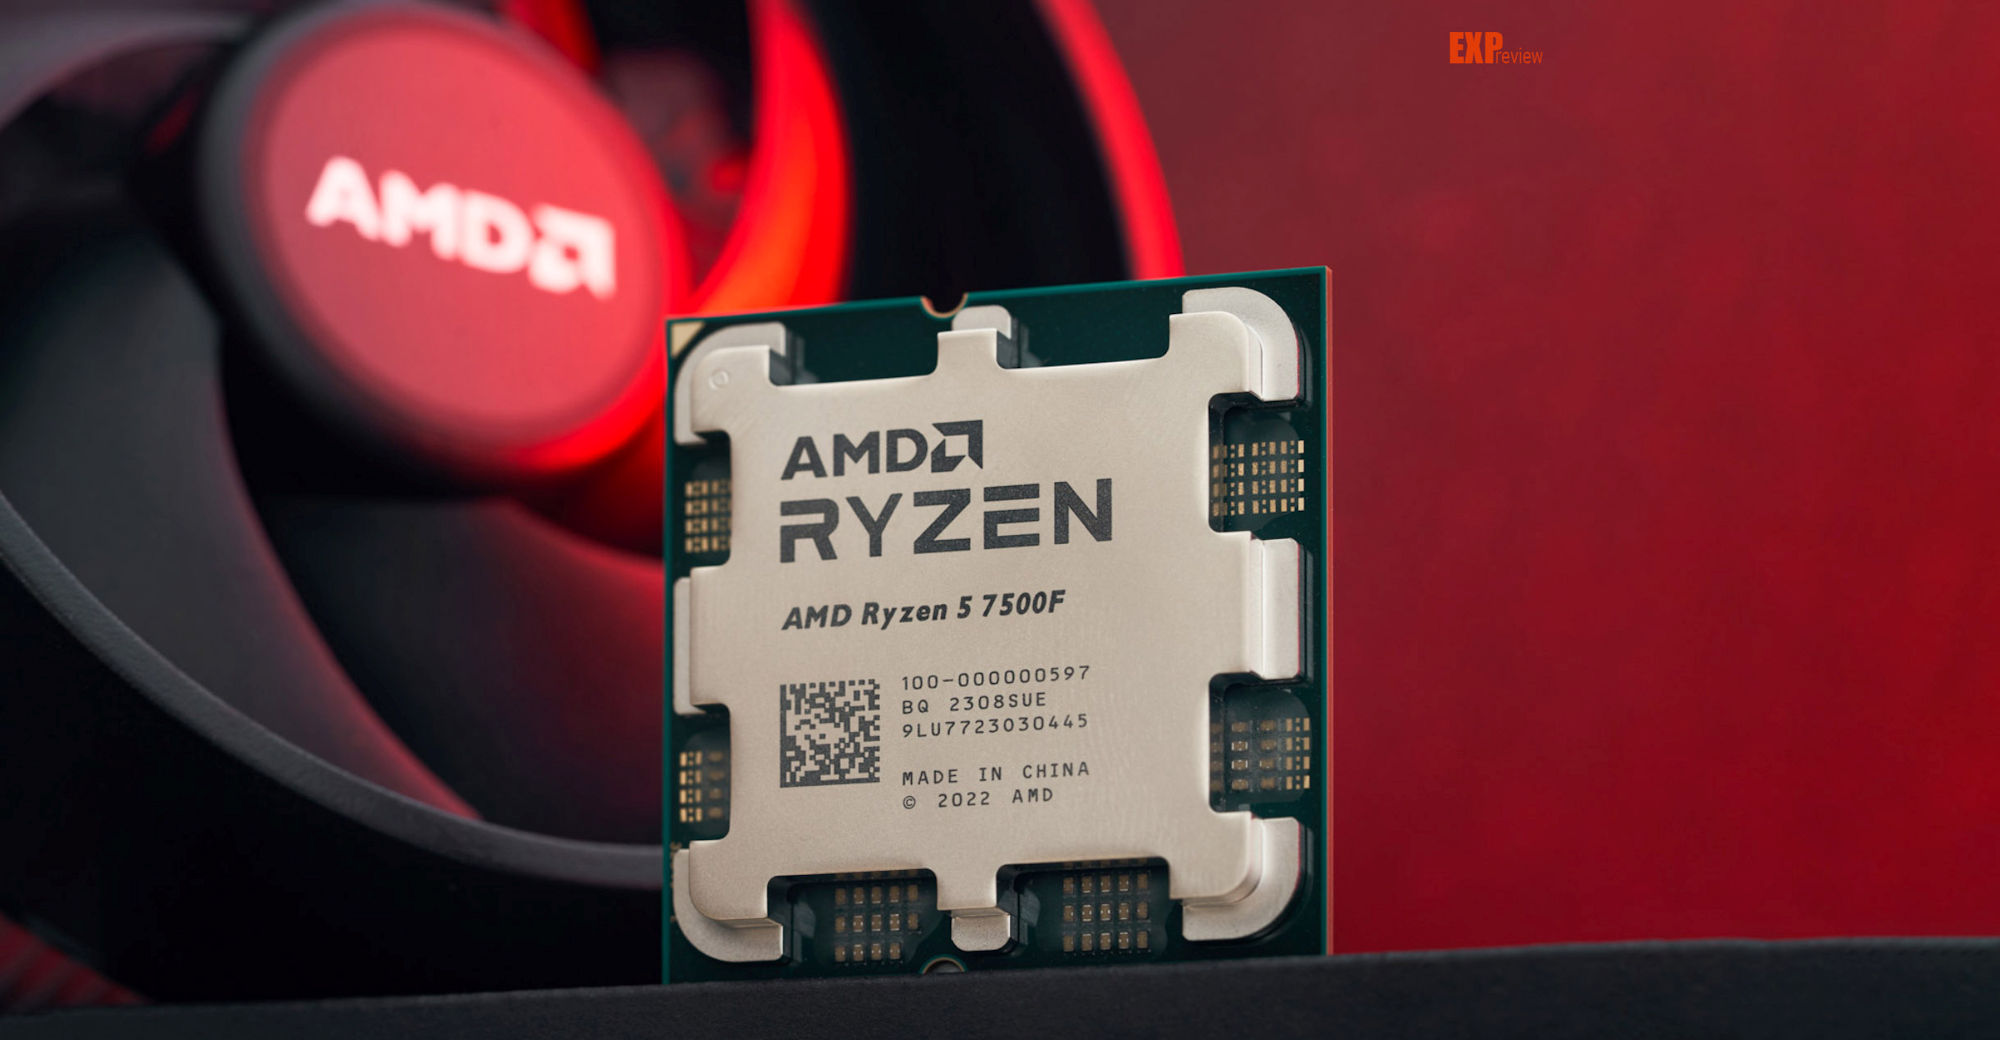 AMD Ryzen 5 7500F reviews are out, CPU to launch globally at $179